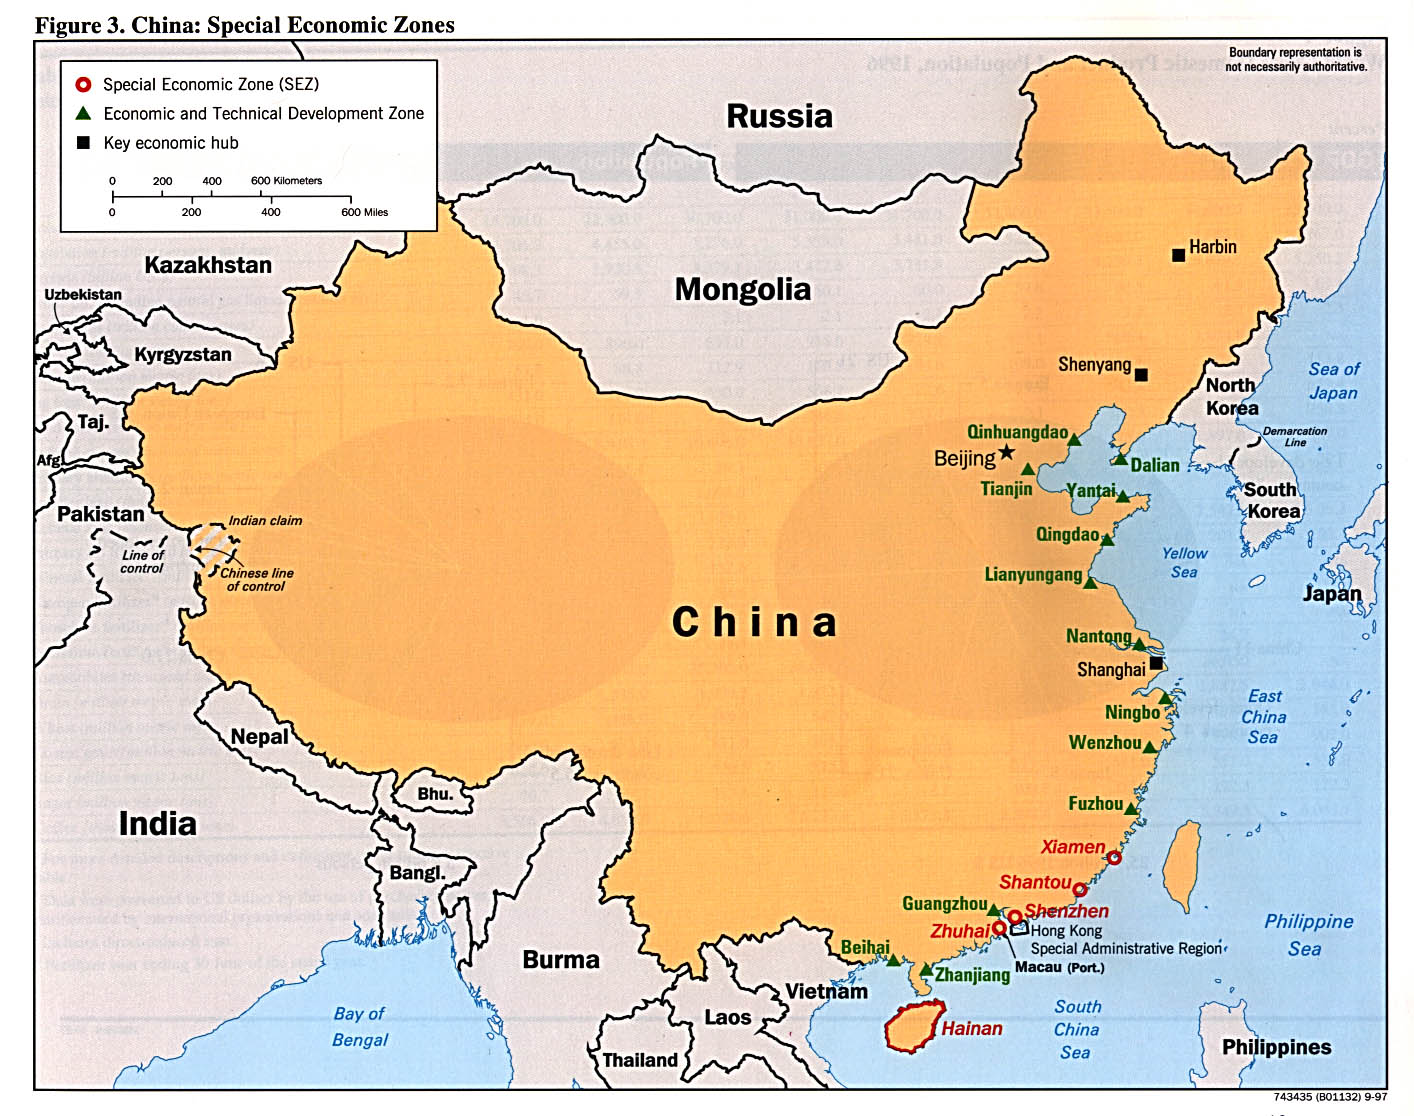 http://www.populationdata.net/images/cartes/asie/extreme-orient/chine/chine_zes.jpg